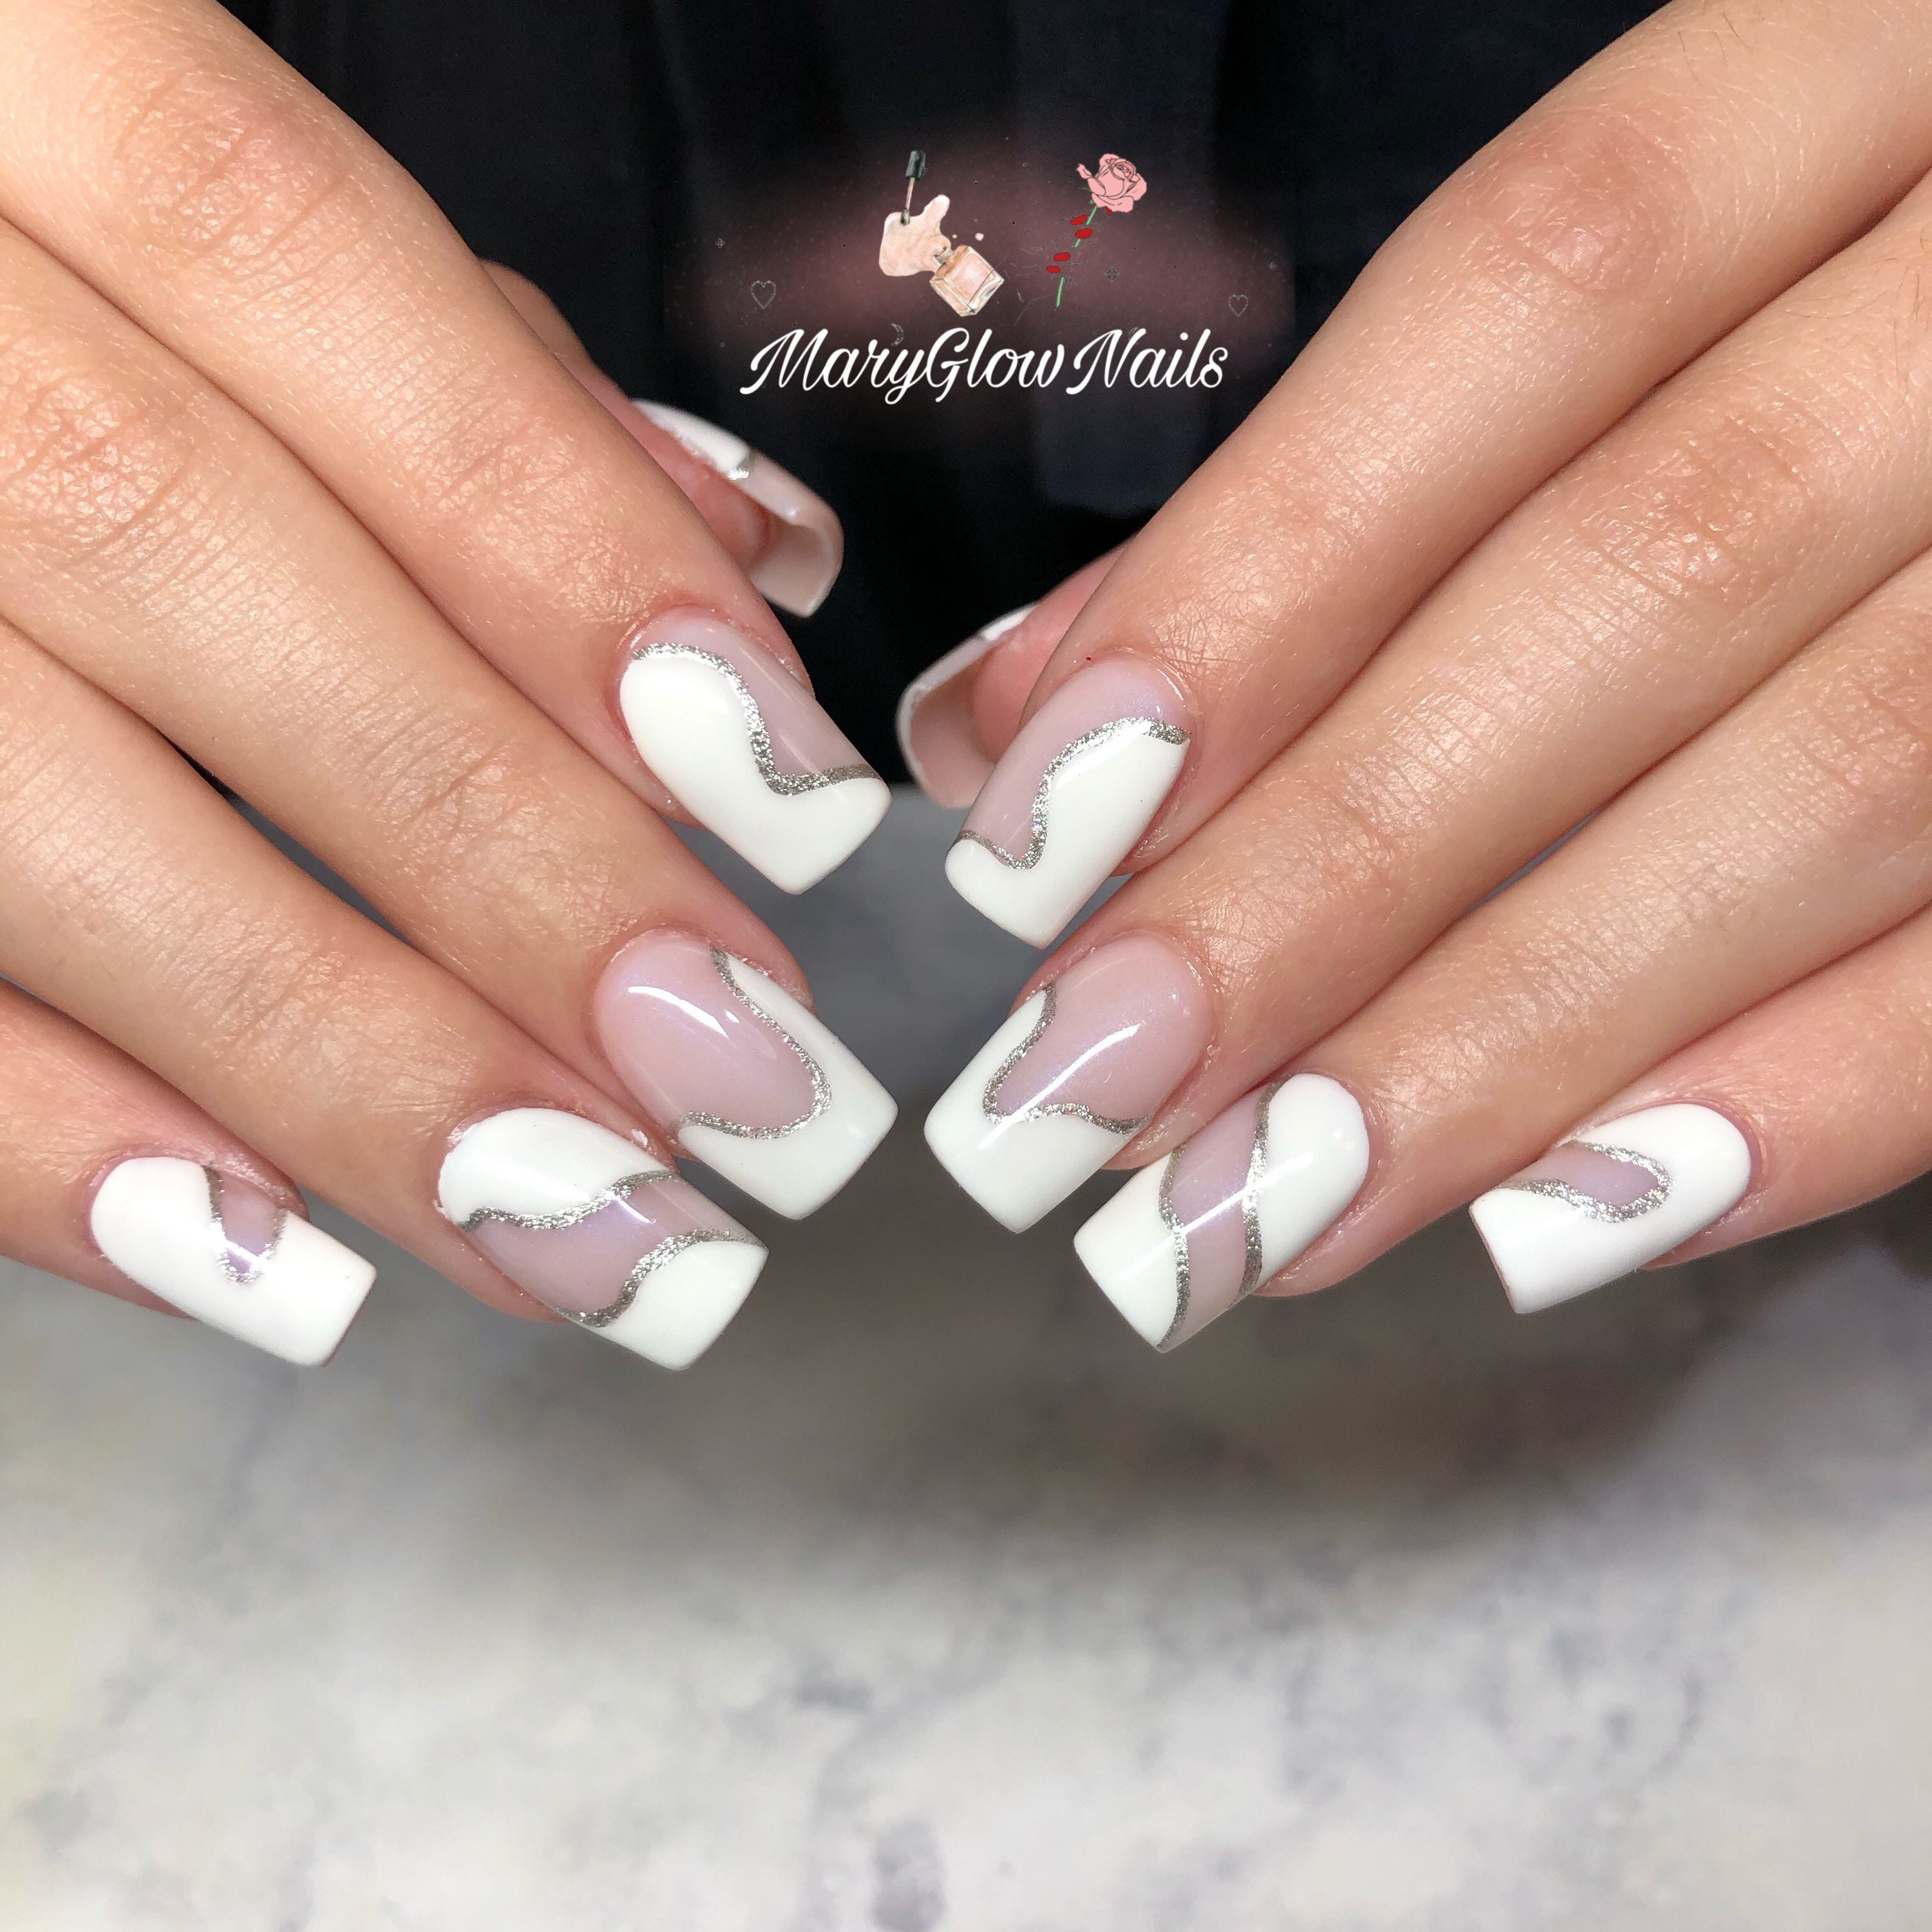 Simple Nail Art Designs: 9 Popular Styles To Rock In 2021